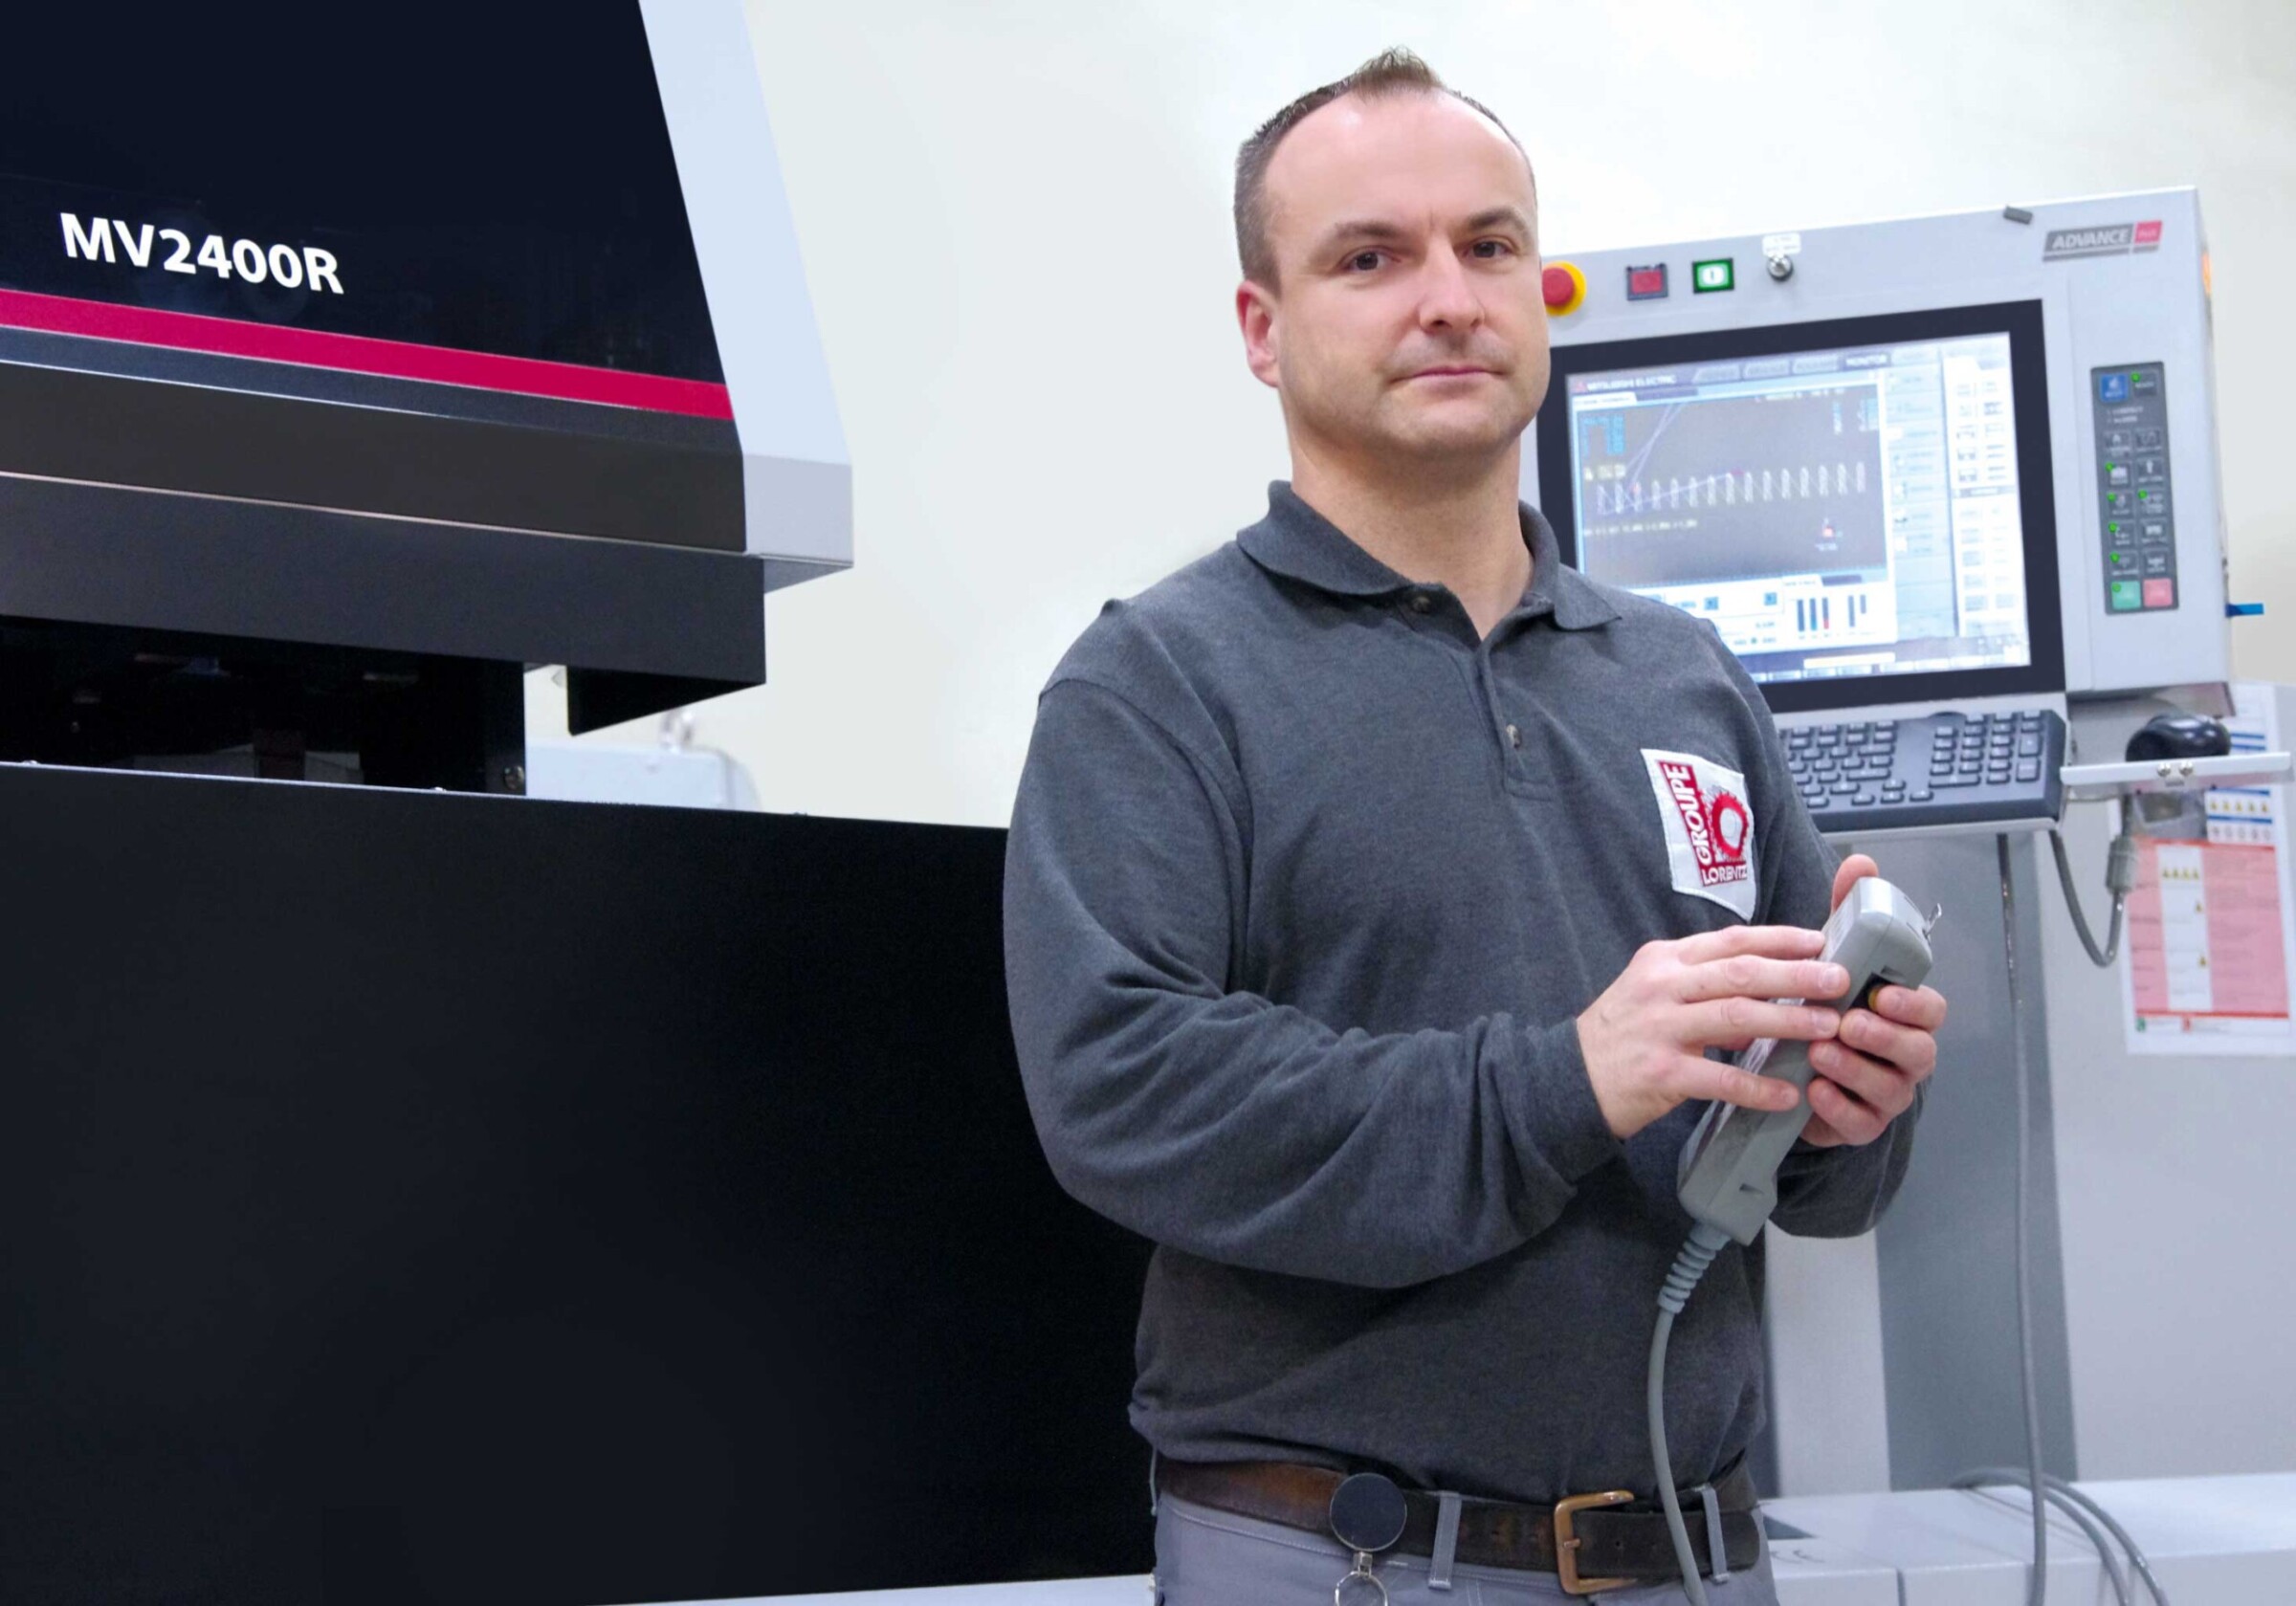 “The MV2400R is so comfortable to program, operate and control that it’s almost like being on holiday for the operator,” says Jean-Pierre Hornn, EDM specialist at the Lorentz jobshop in Esbly.